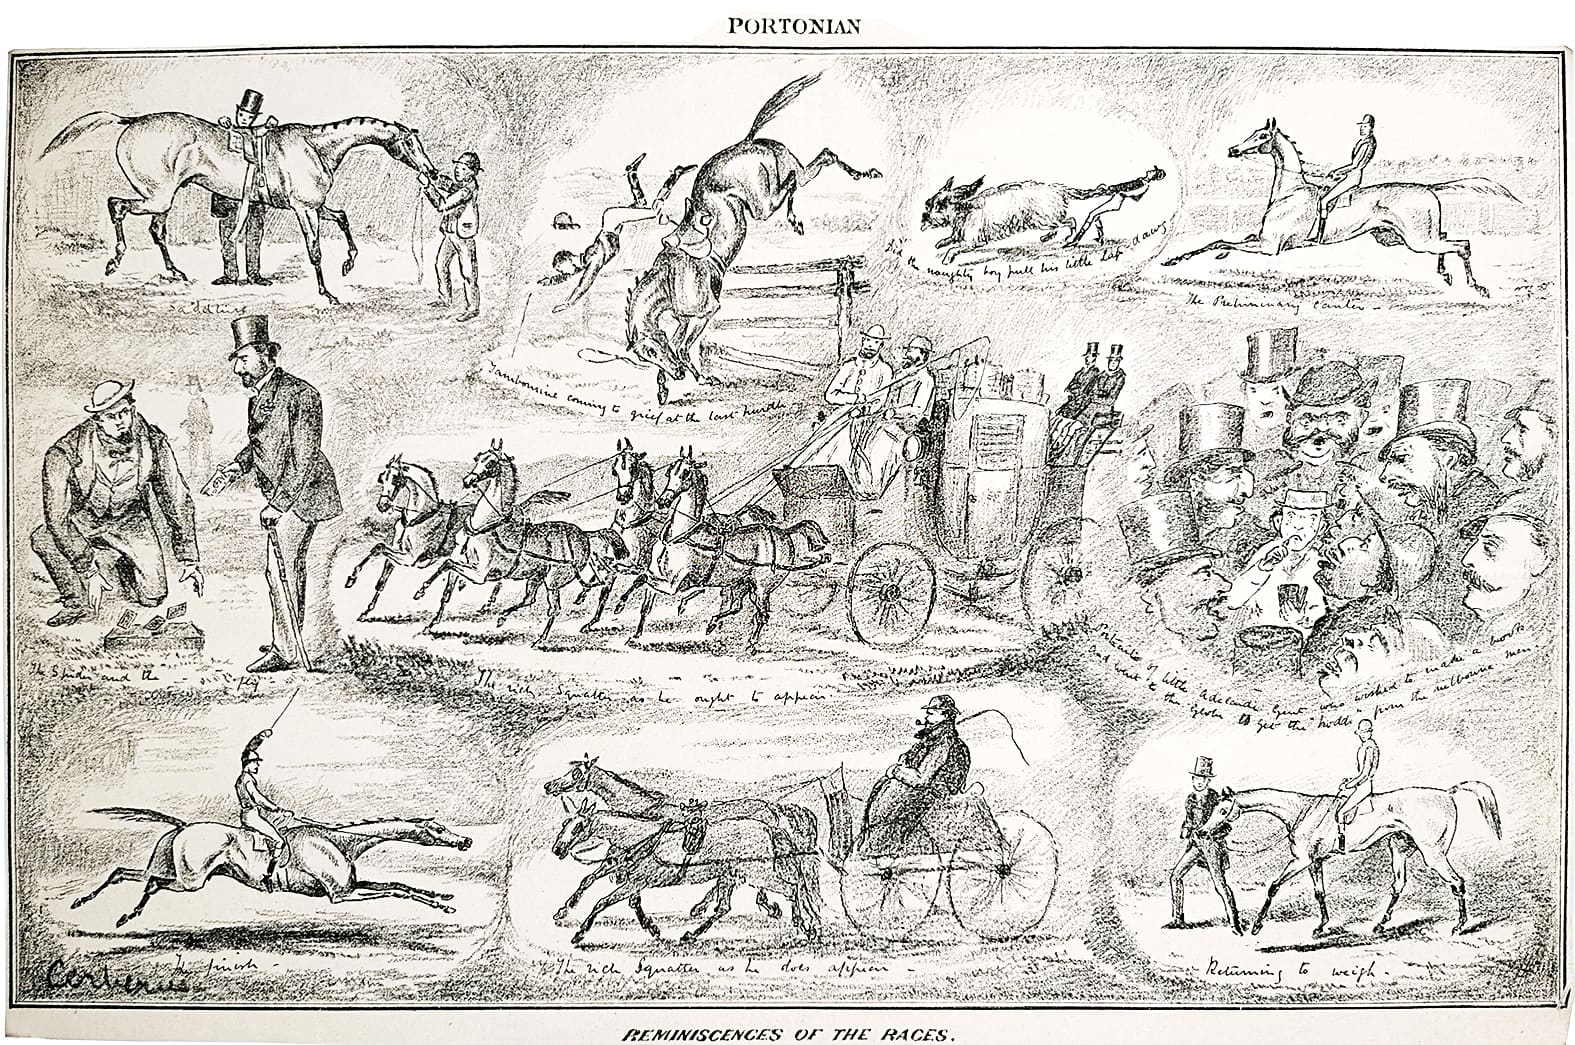 Reminiscences of the Races. - Antique Print from 1873